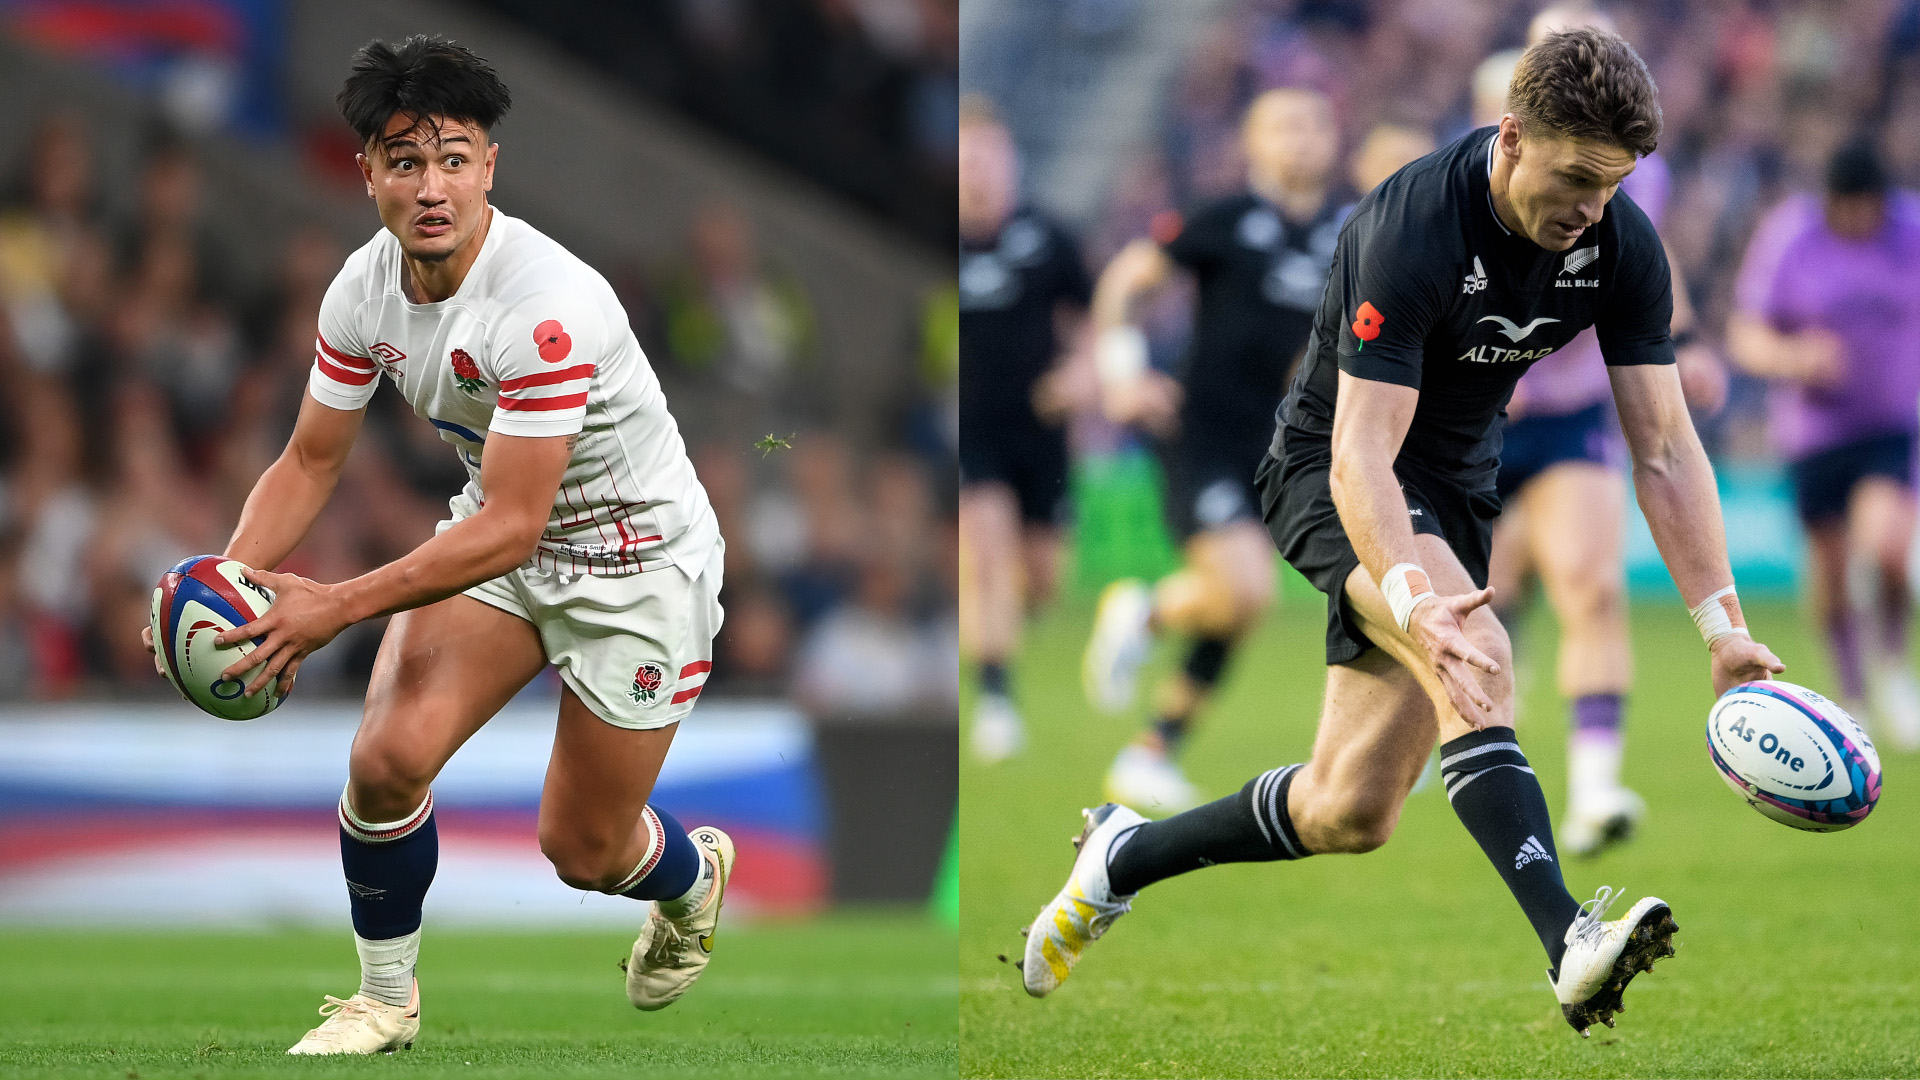 England vs New Zealand live stream how to watch Autumn Nations Series rugby from anywhere today TechRadar